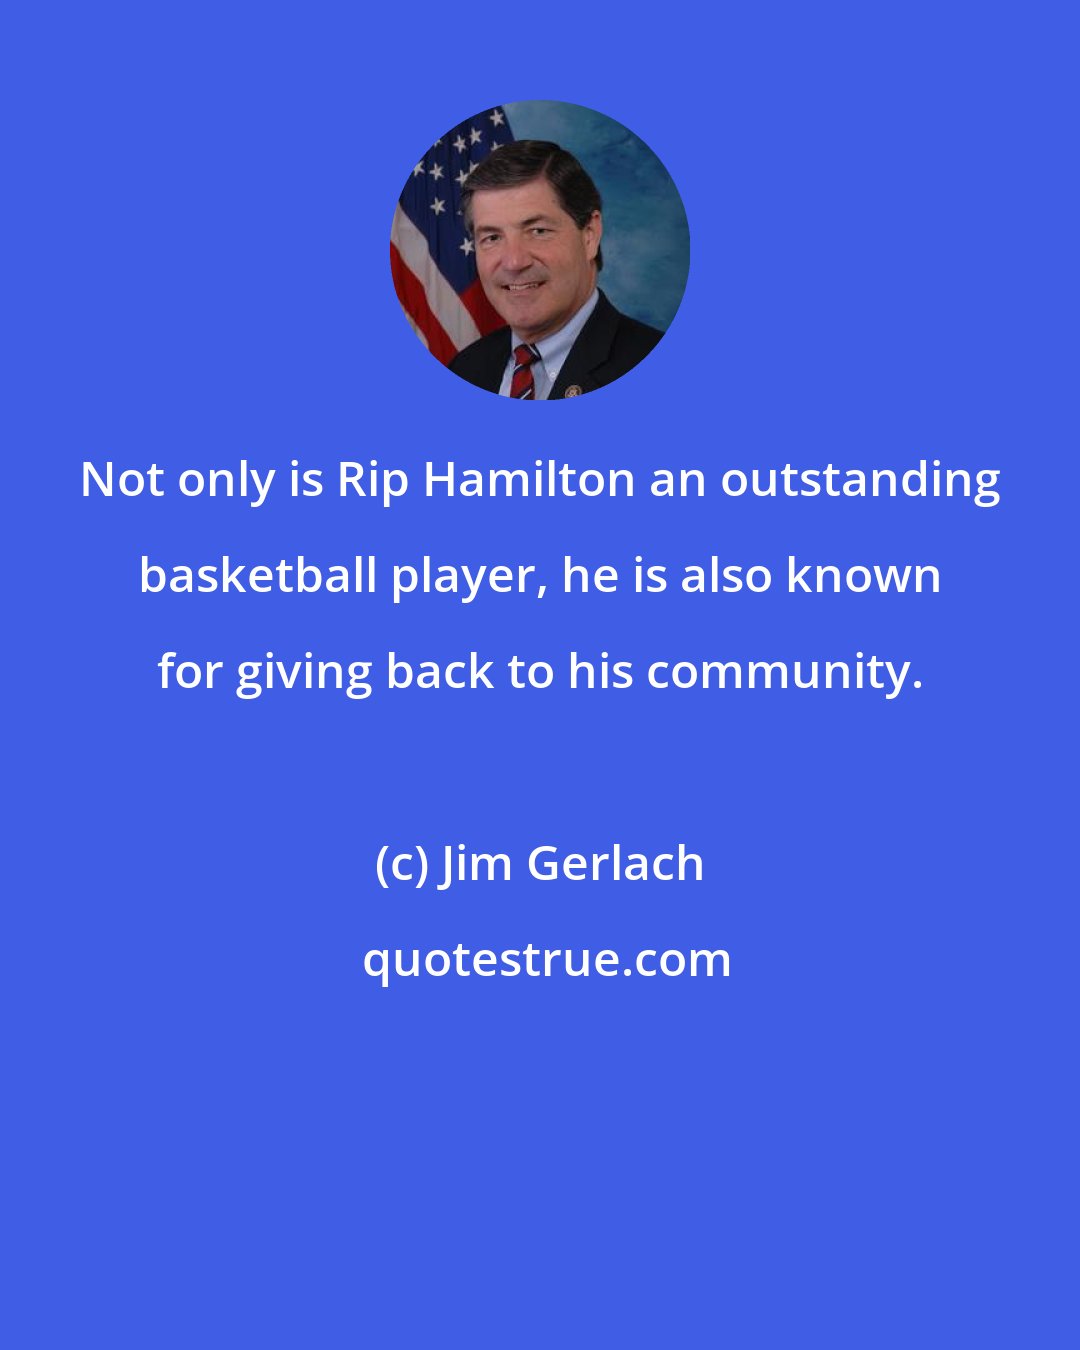 Jim Gerlach: Not only is Rip Hamilton an outstanding basketball player, he is also known for giving back to his community.